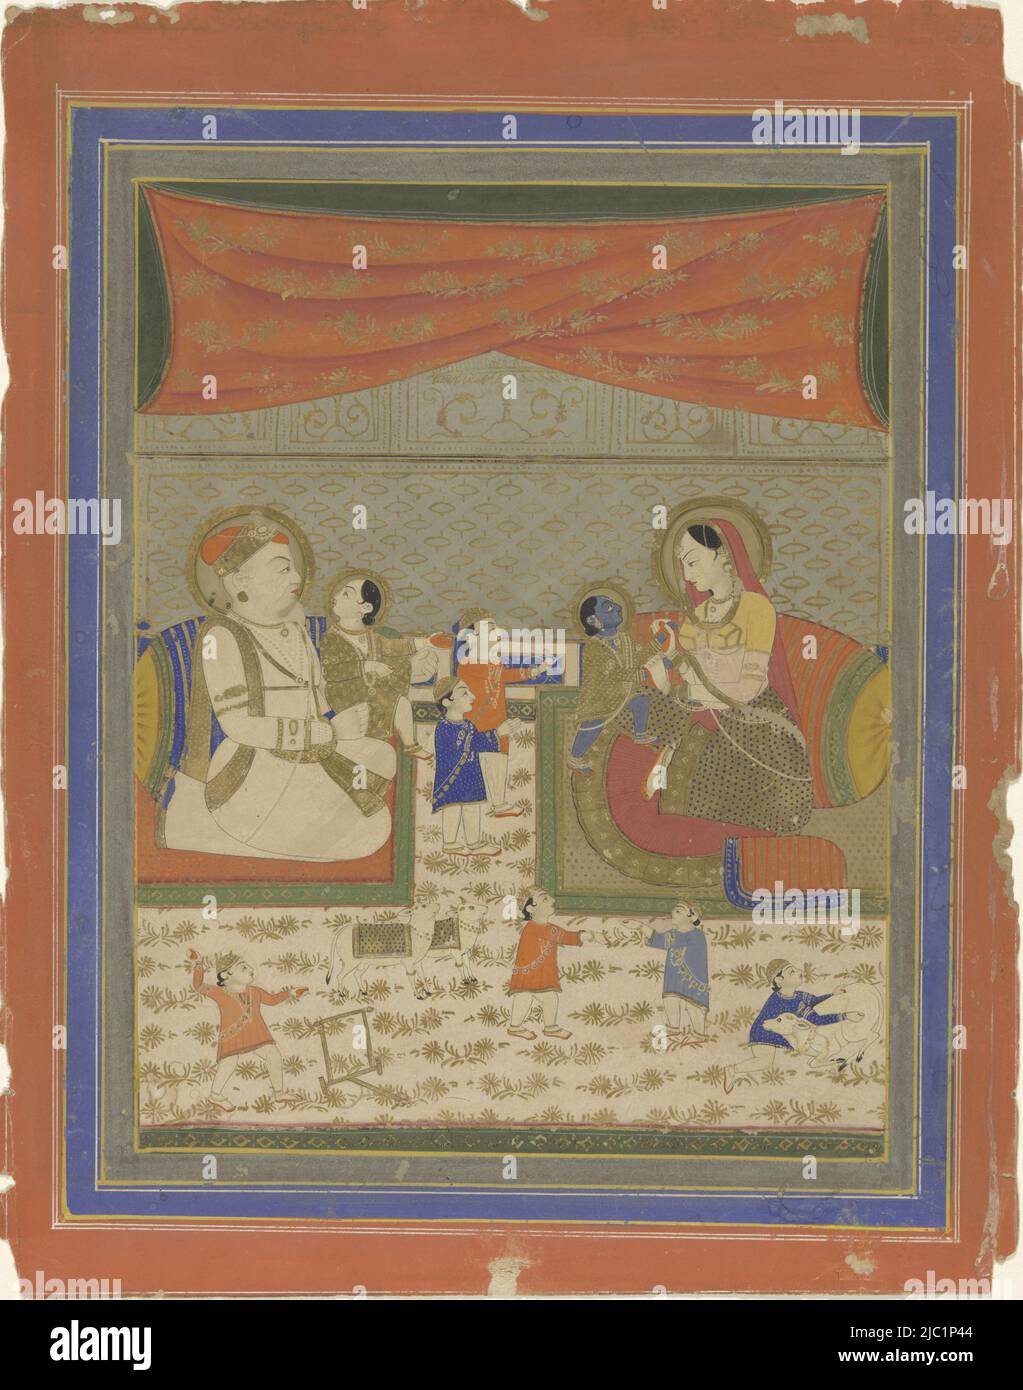 The royal couple sits in a rather geometric composition with lots of decorative textiles facing each other on colored carpets, each parent has a child on their lap and between the two rugs two children with their arms towards Krishna stand on their mother's lap, on the white carpet printed with gold motifs in the foreground four children are playing, two cows look up at Krishna and a cow serves as a toy for the child on the lower right. Around the show a number of decorative borders in plain gray with gold frame lines, royal blue with white frame lines and a wider orange-red border with gold Stock Photo